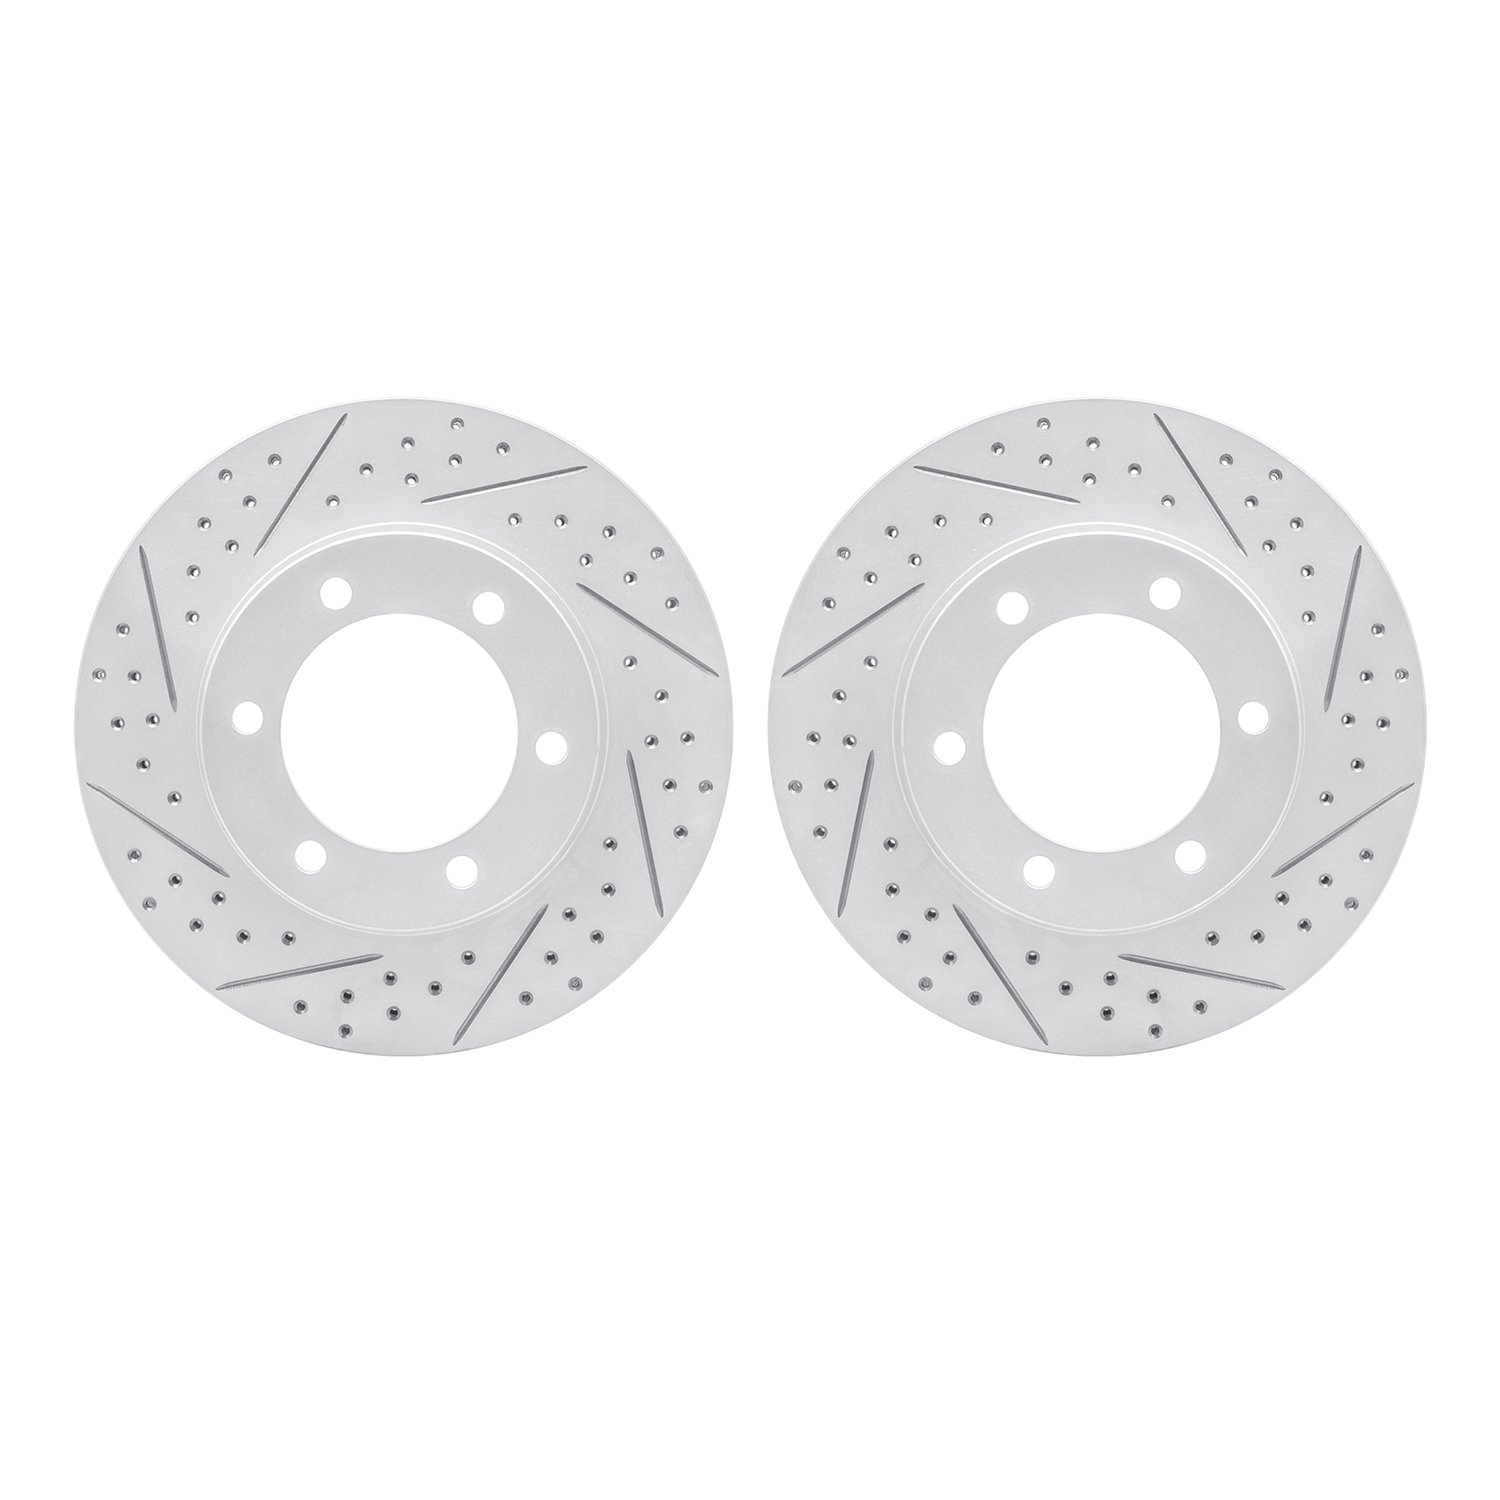 2002-76020 Geoperformance Drilled/Slotted Brake Rotors, 1995-2004 Lexus/Toyota/Scion, Position: Front